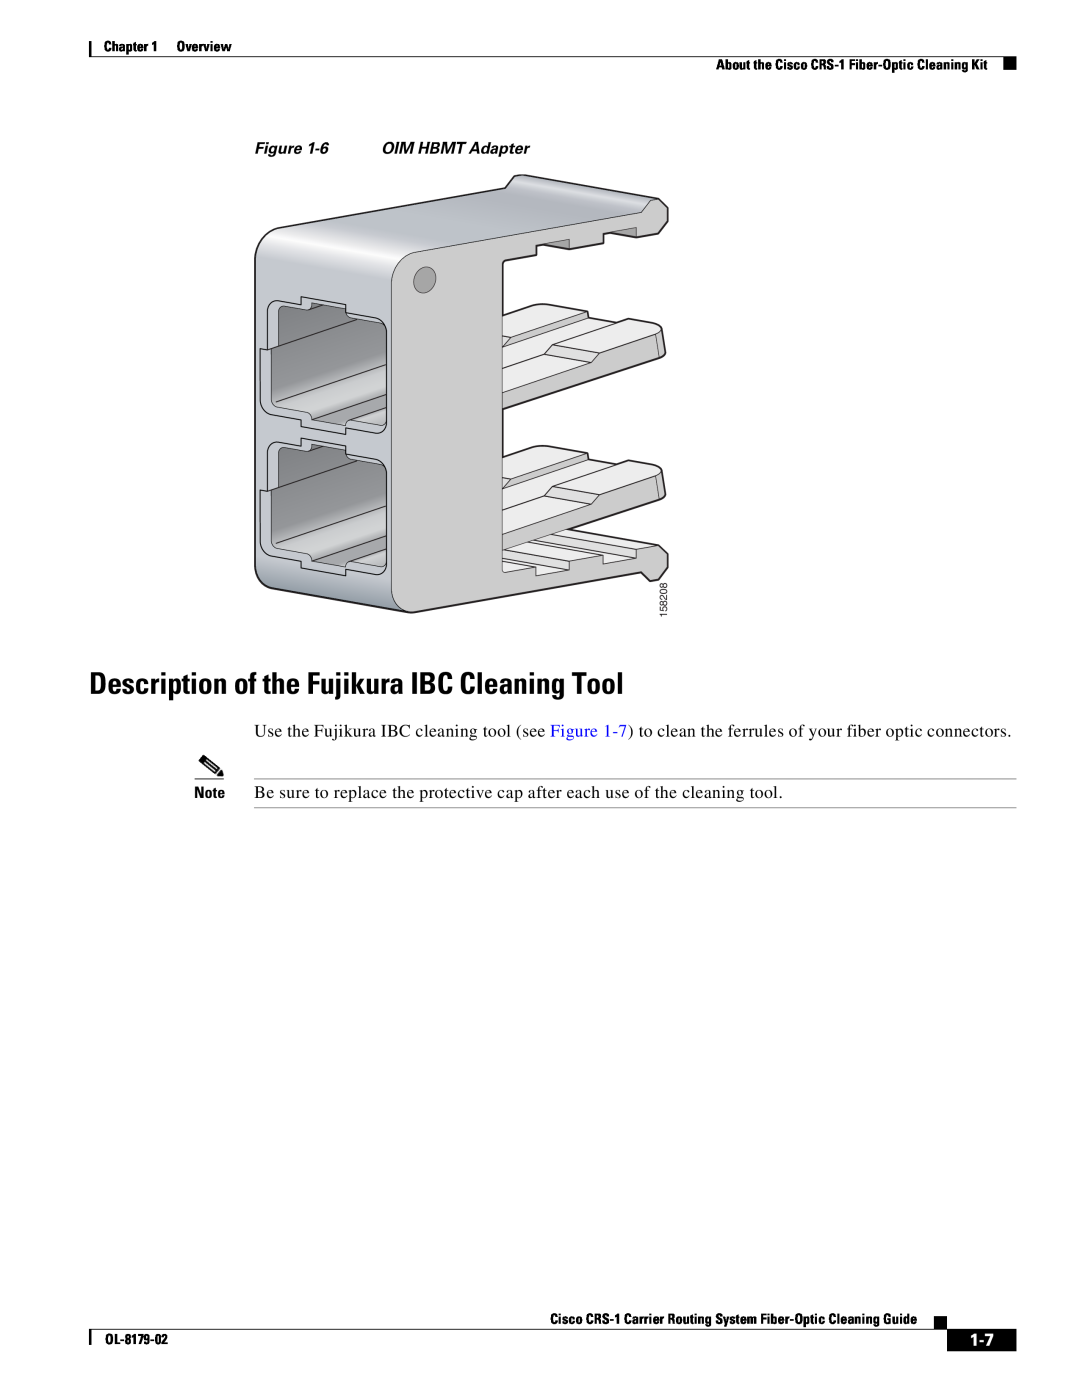 Cisco Systems CRS-1 manual Description of the Fujikura IBC Cleaning Tool, 6OIM HBMT Adapter 